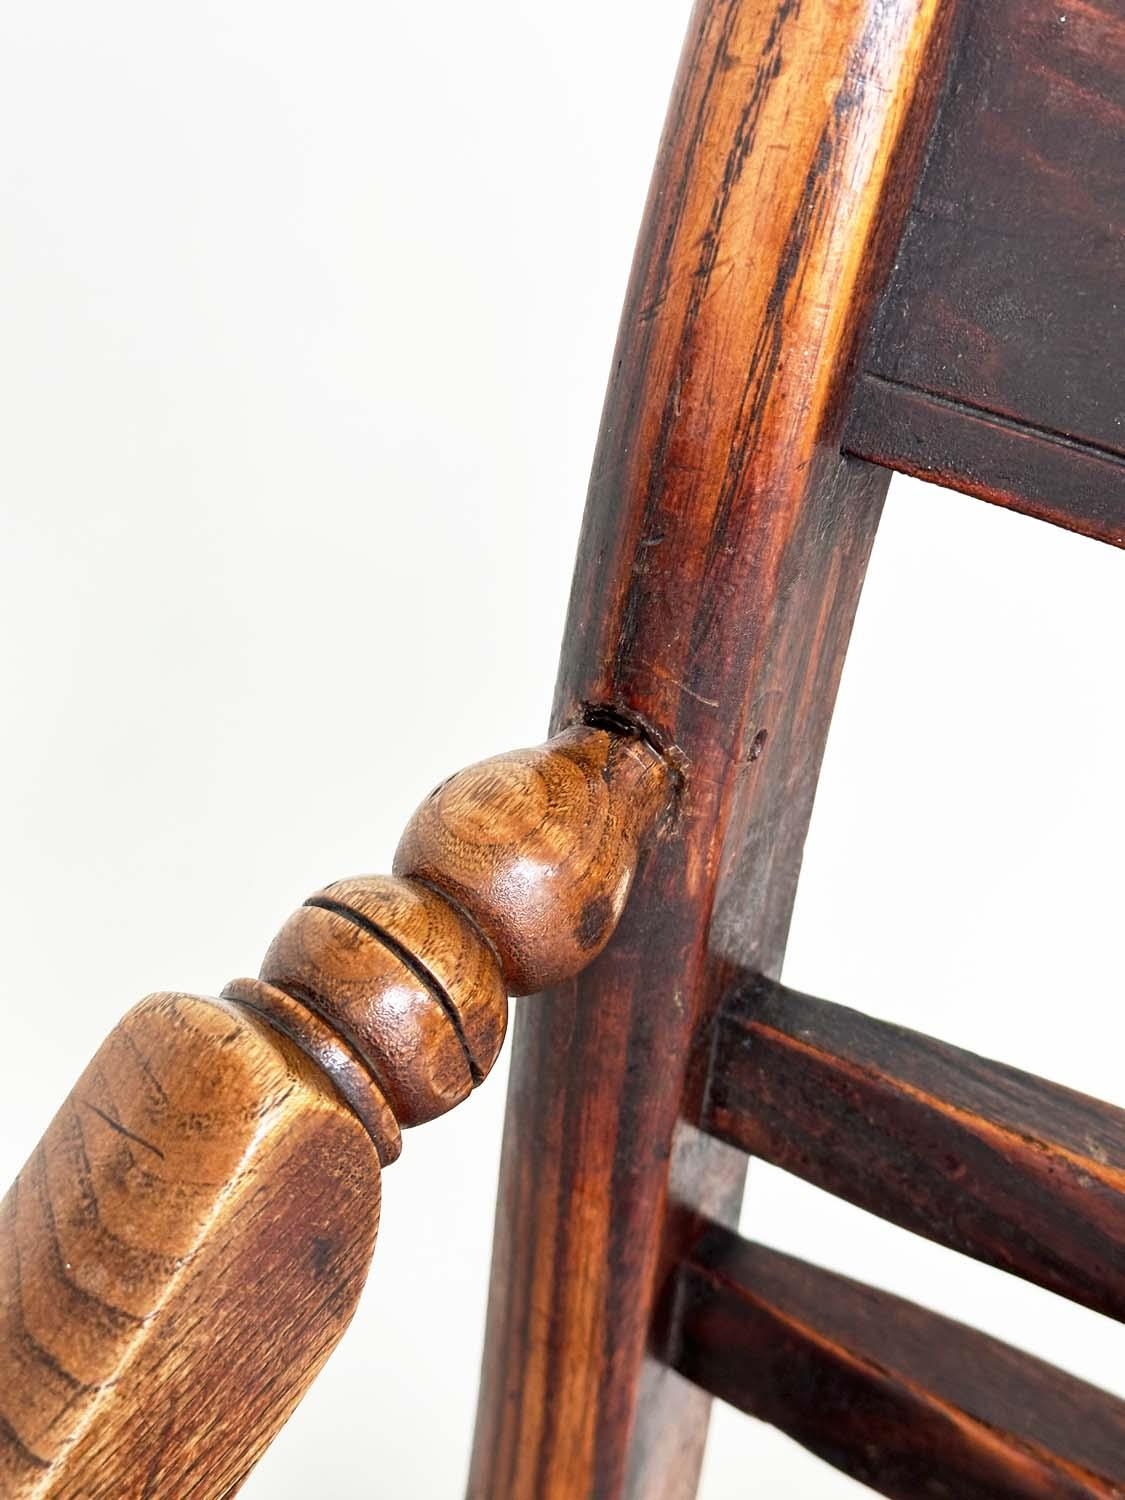 OXFORD ARMCHAIRS, a pair, 19th century English, High Wycombe, ash, elm and alder with shaped seats - Image 7 of 11